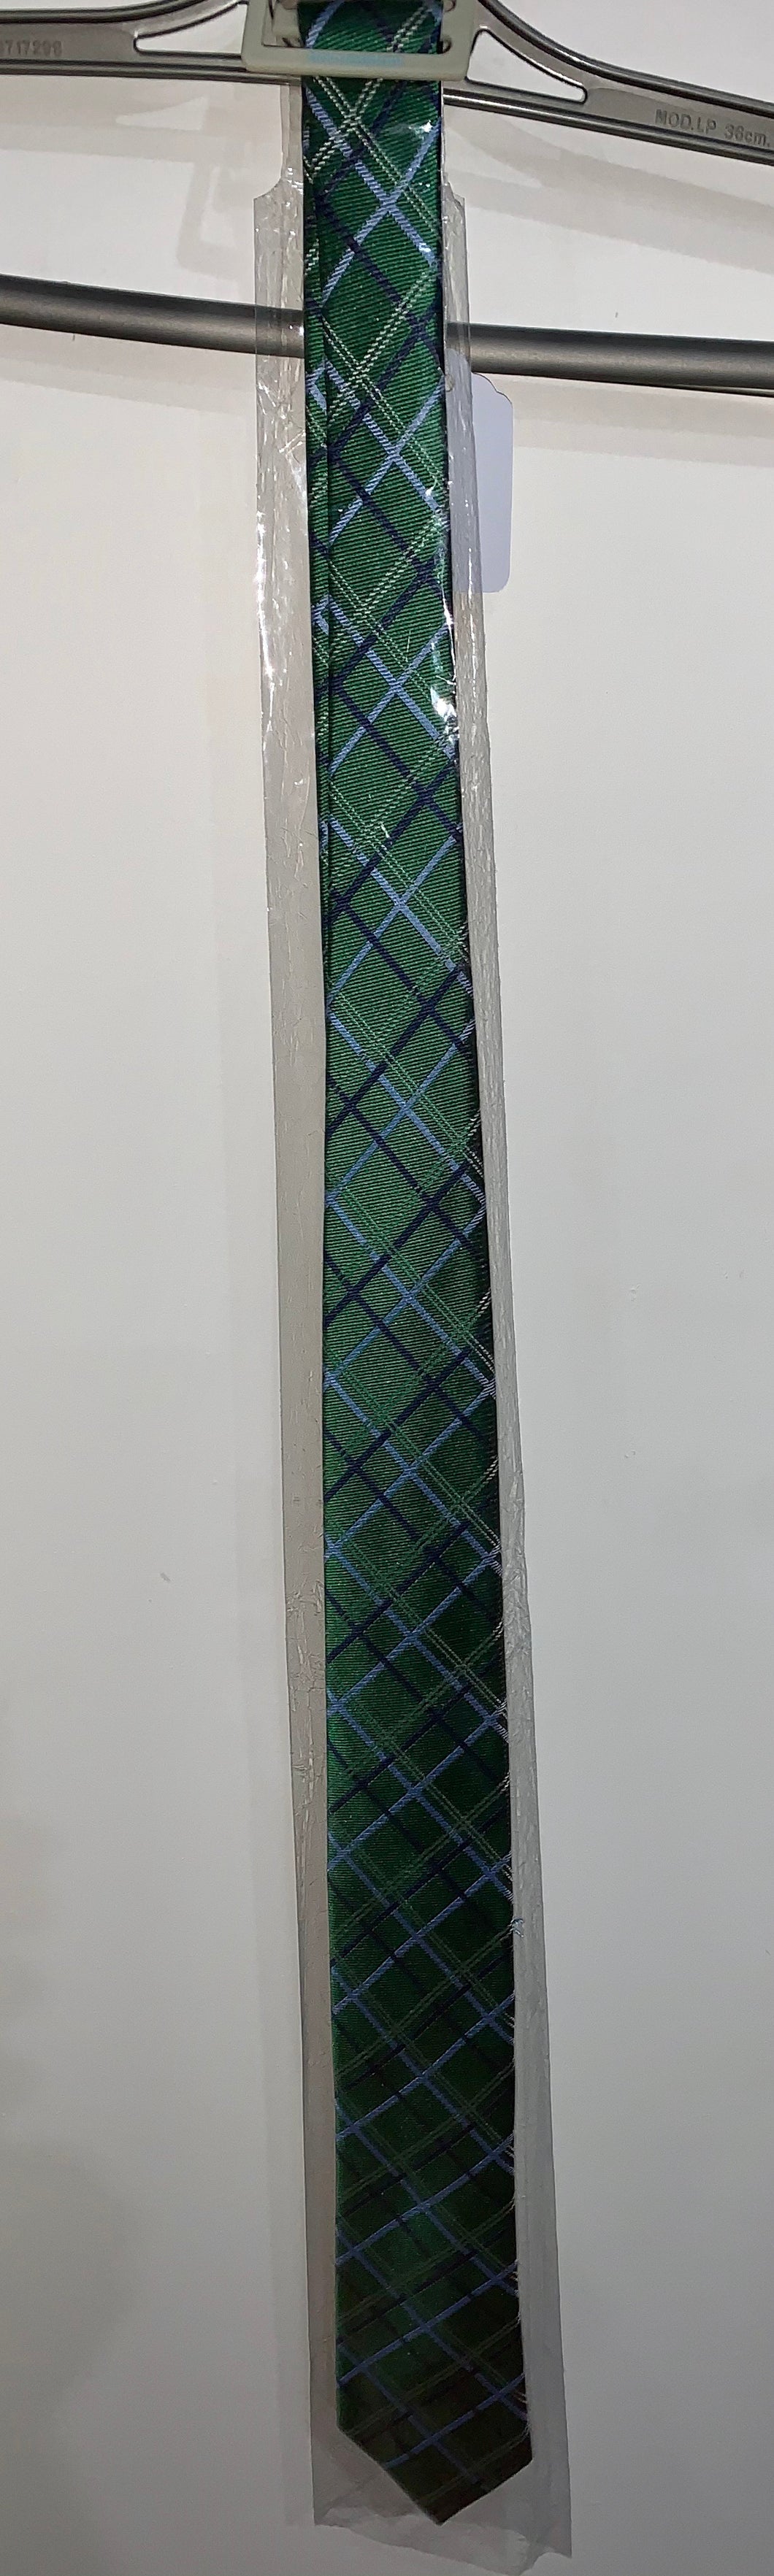 TIE, GREEN WITH LIGHT AND DARK BLUE LINES, 100% SILK